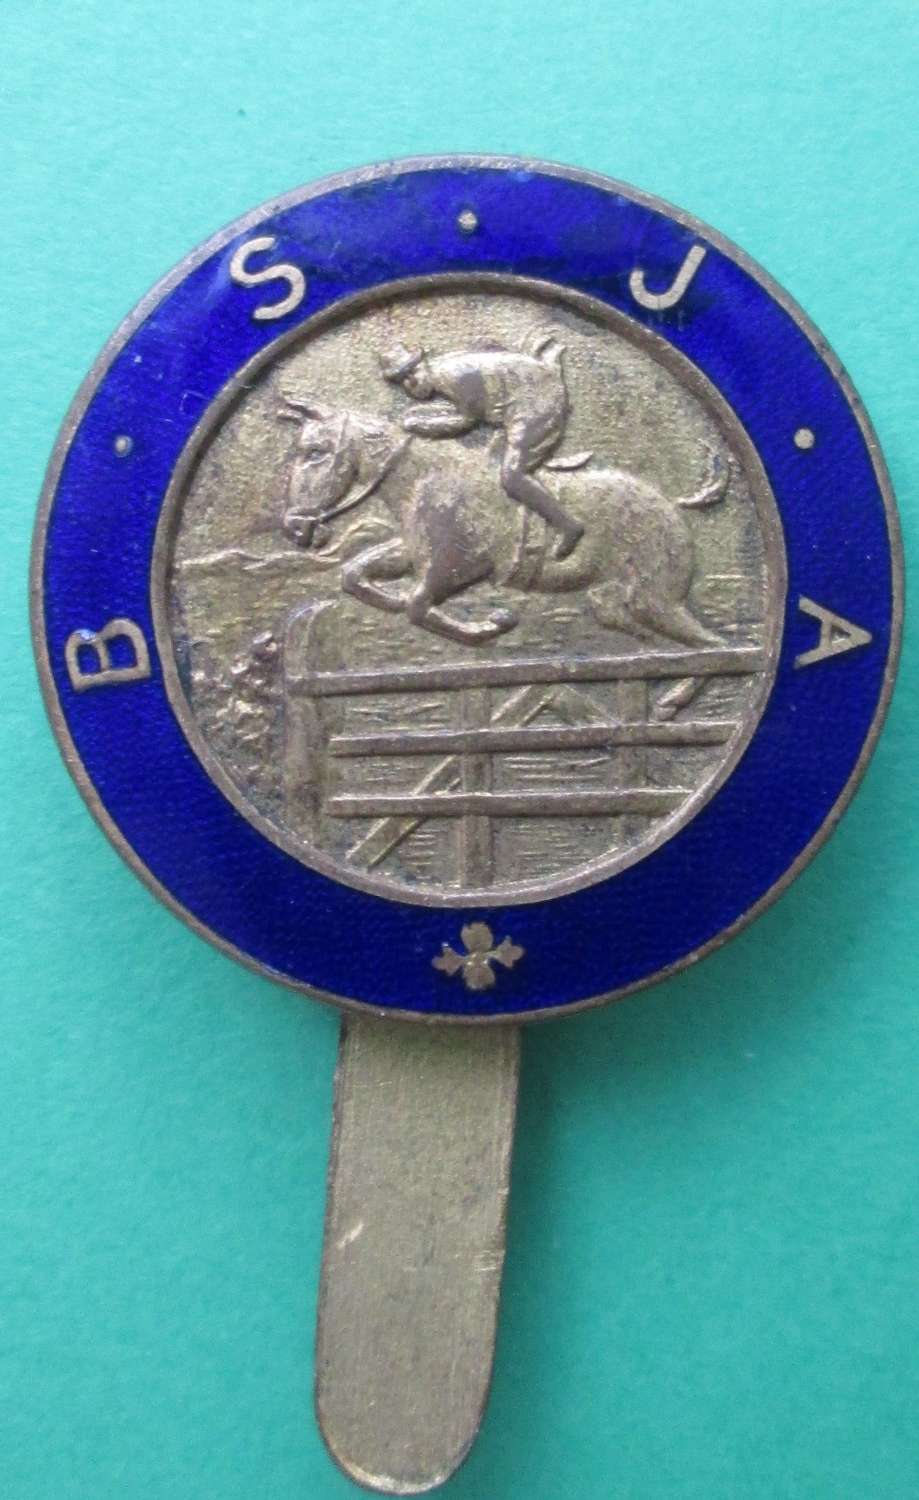 A BRITISH SHOW JUMPING ASSOCIATION BADGE OLD EXAMPLE